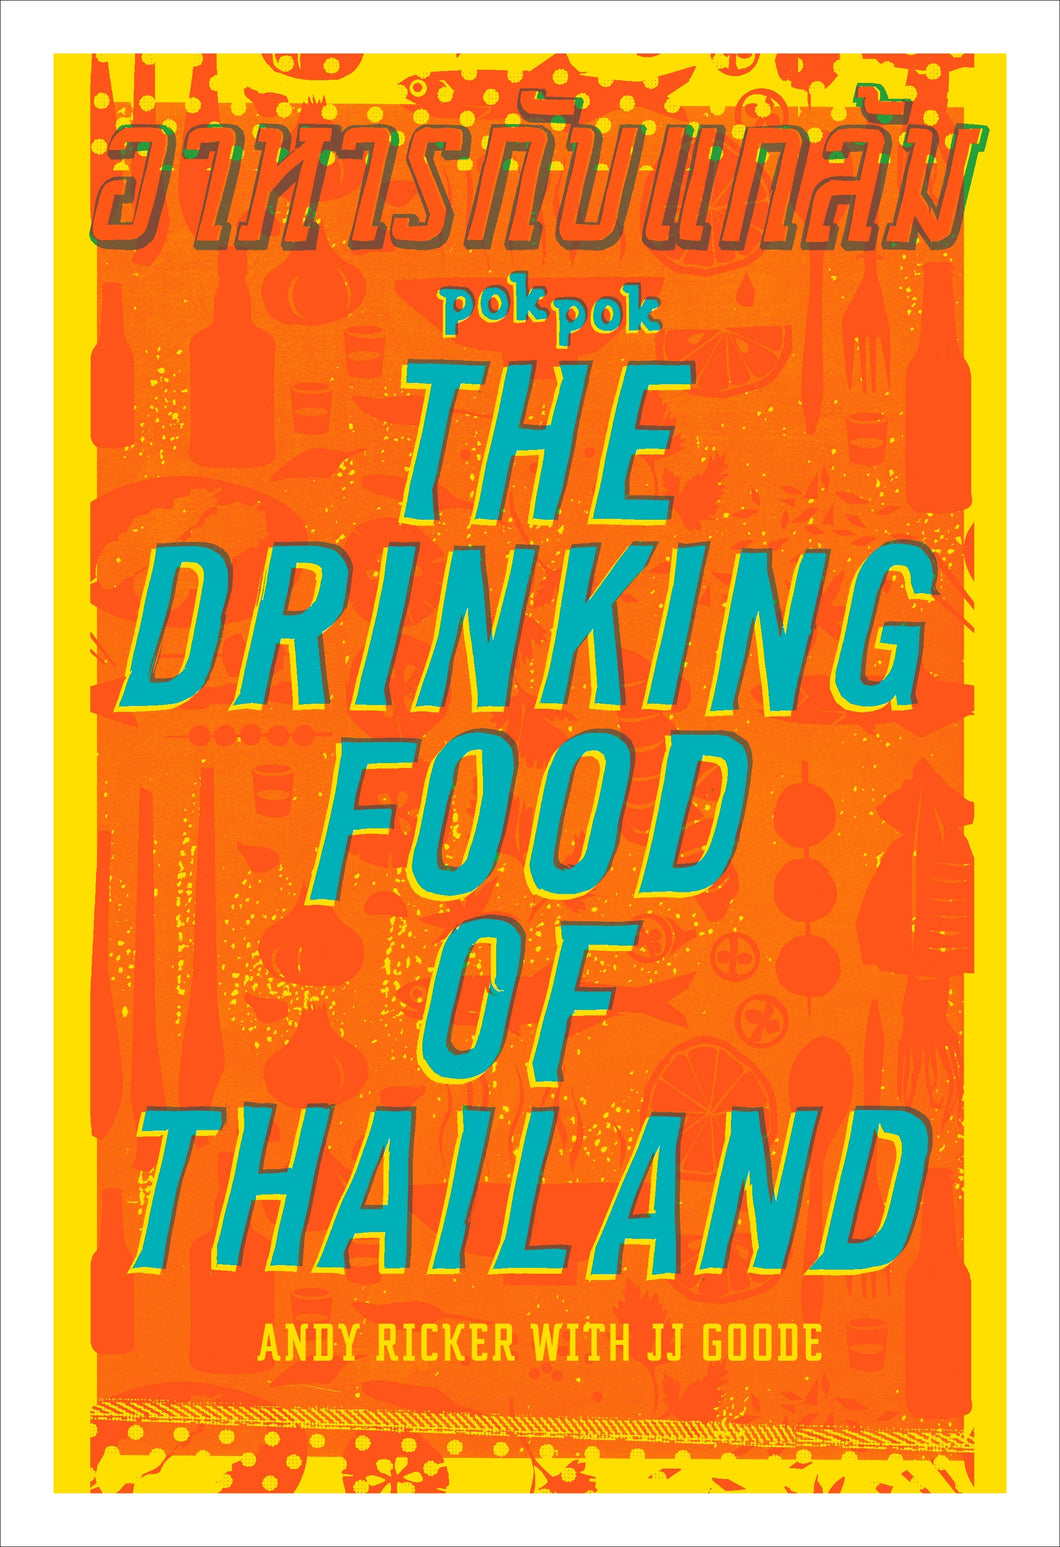 Pok Pok, The Drinking Food of Thailand